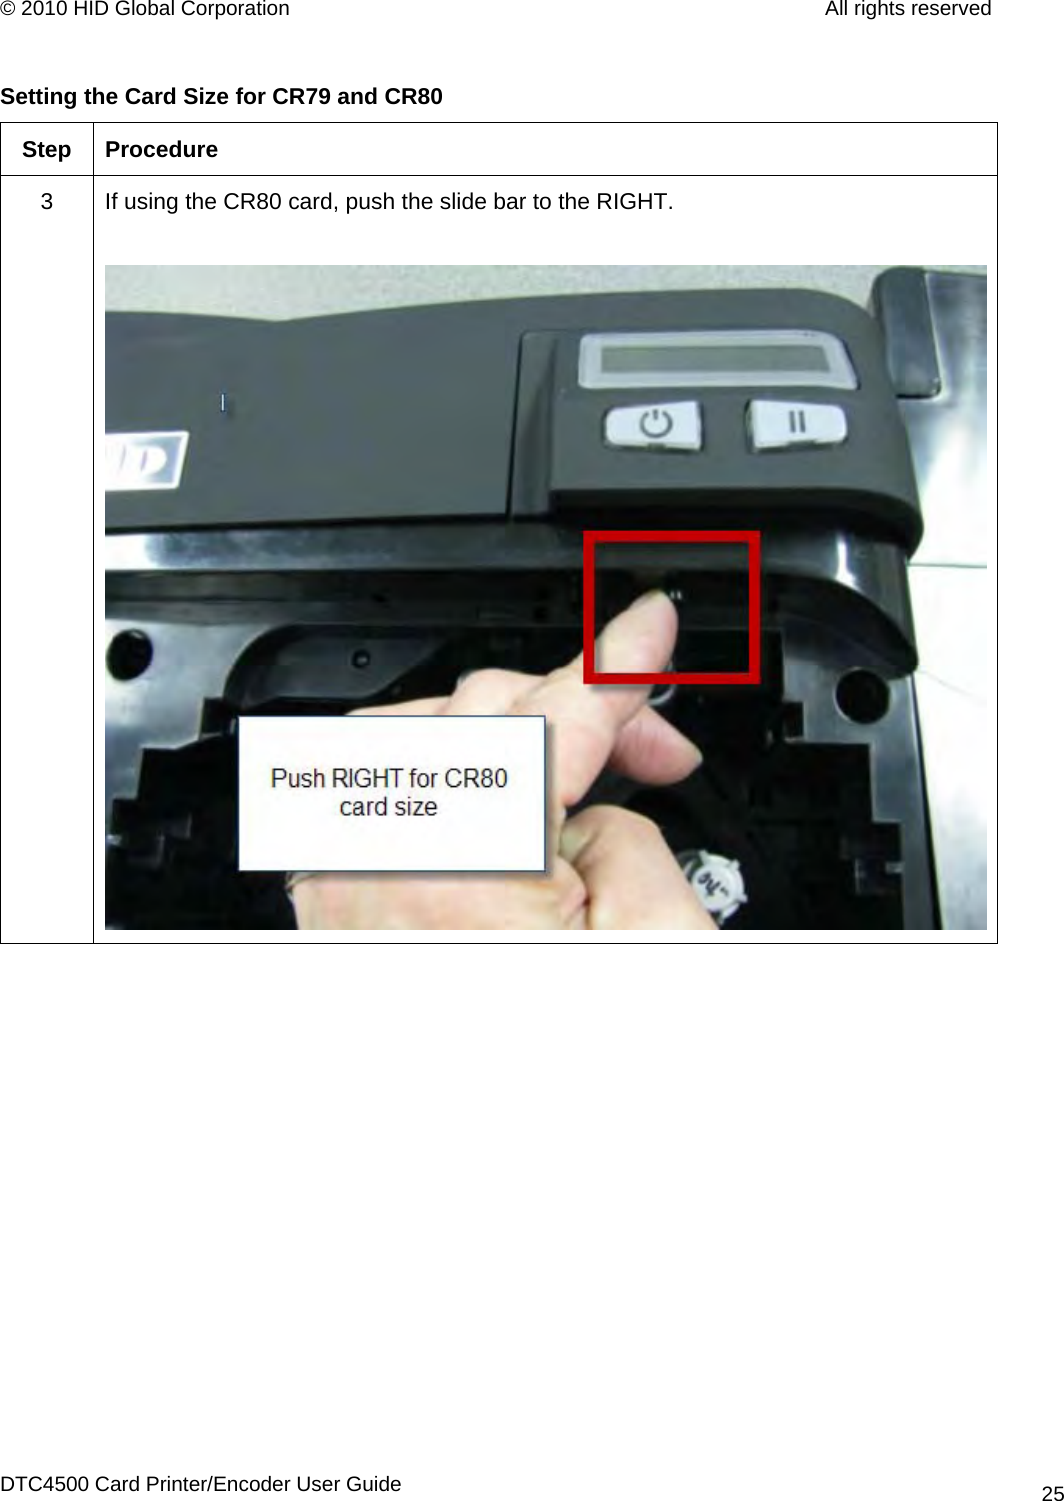 © 2010 HID Global Corporation         All rights reserved  Setting the Card Size for CR79 and CR80 Step Procedure 3  If using the CR80 card, push the slide bar to the RIGHT.  DTC4500 Card Printer/Encoder User Guide 25